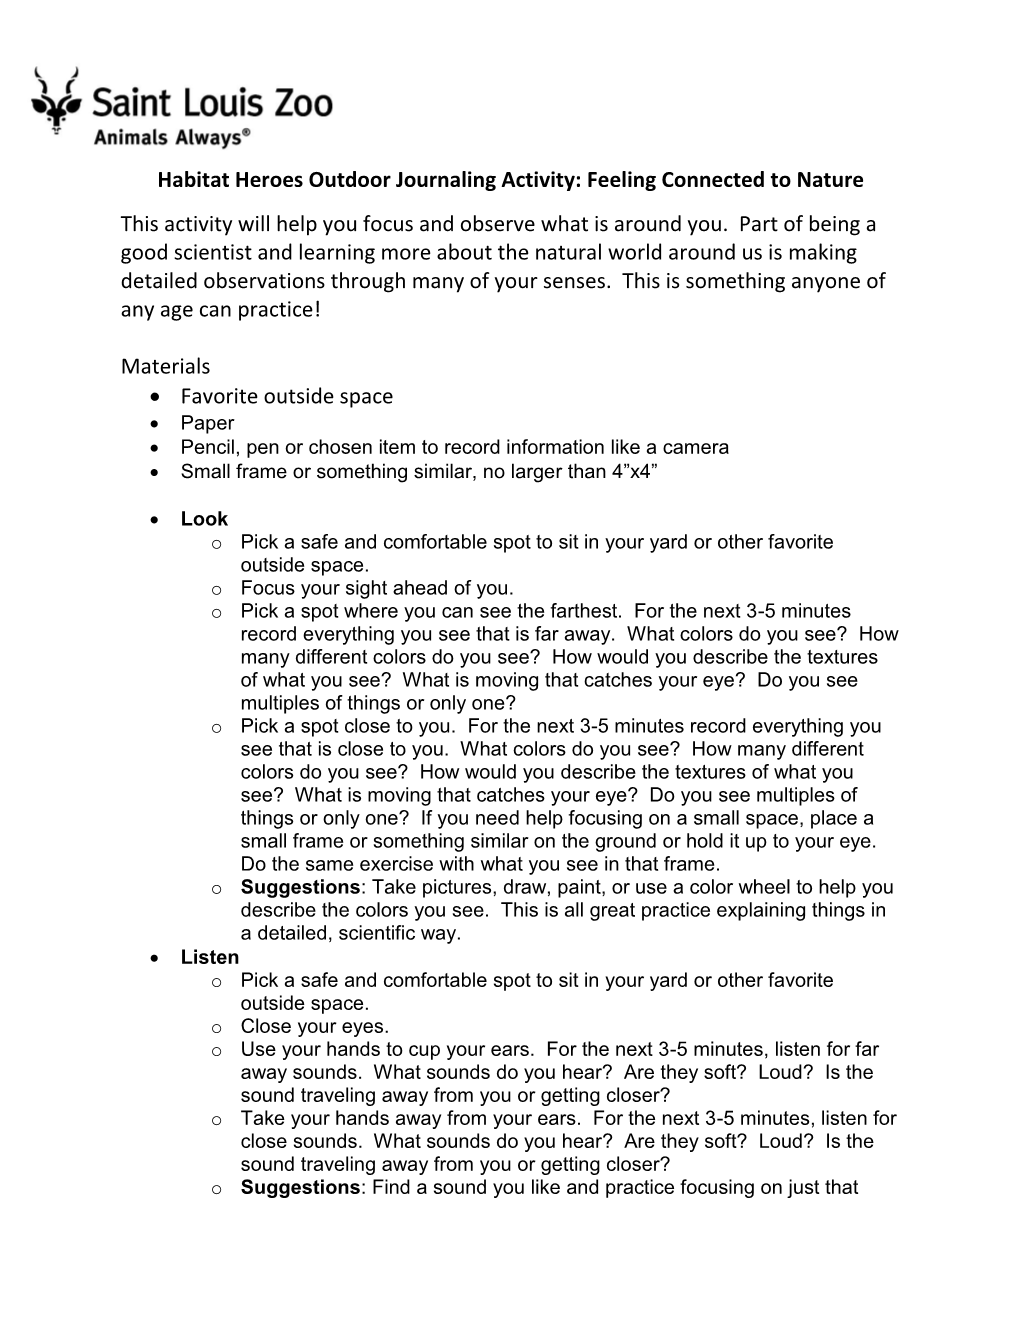 Habitat Heroes Outdoor Journaling Activity: Feeling Connected to Nature This Activity Will Help You Focus and Observe What Is Around You